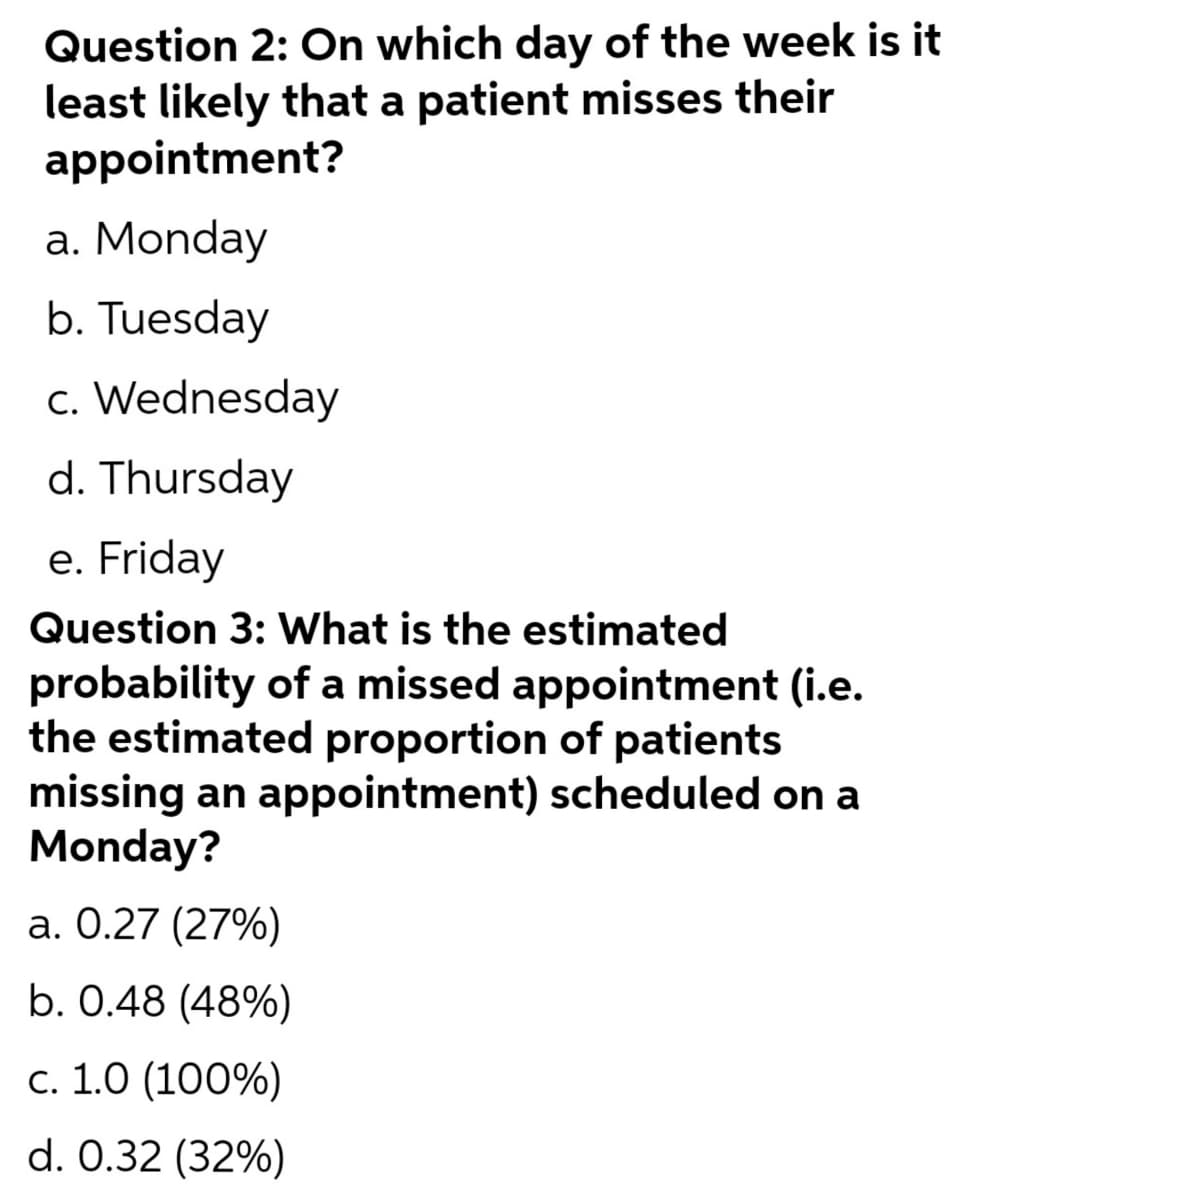 Question 2: On which day of the week is
least likely that a patient misses their
appointment?
a. Monday
b. Tuesday
c. Wednesday
d. Thursday
e. Friday
Question 3: What is the estimated
probability of a missed appointment (i.e.
the estimated proportion of patients
missing an appointment) scheduled on a
Monday?
a. 0.27 (27%)
b. 0.48 (48%)
c. 1.0 (100%)
d. 0.32 (32%)
